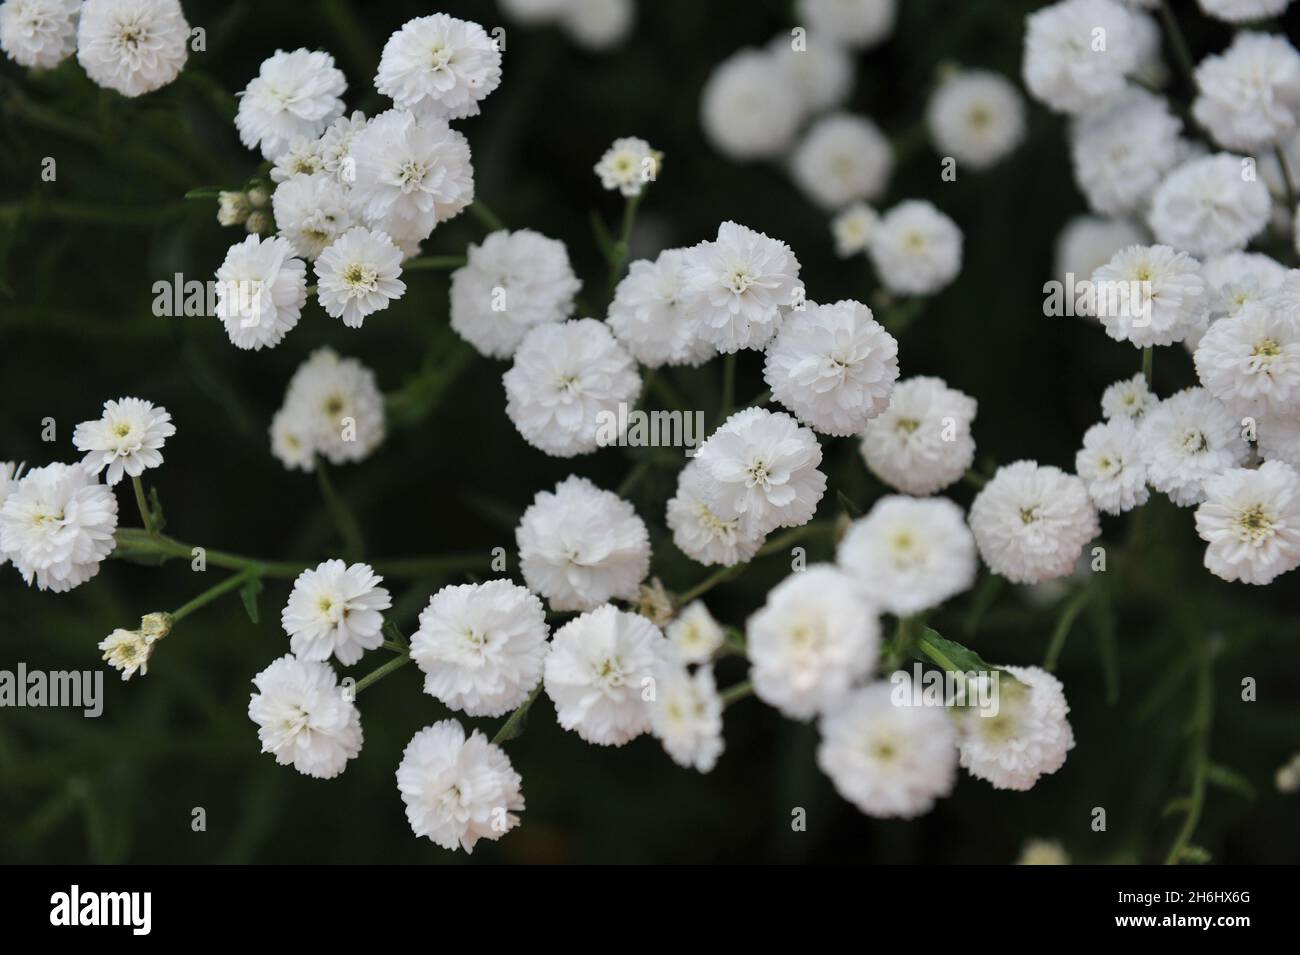 Sneezewort (Achillea ptarmica) Perry's White blooms in a garden in July Stock Photo